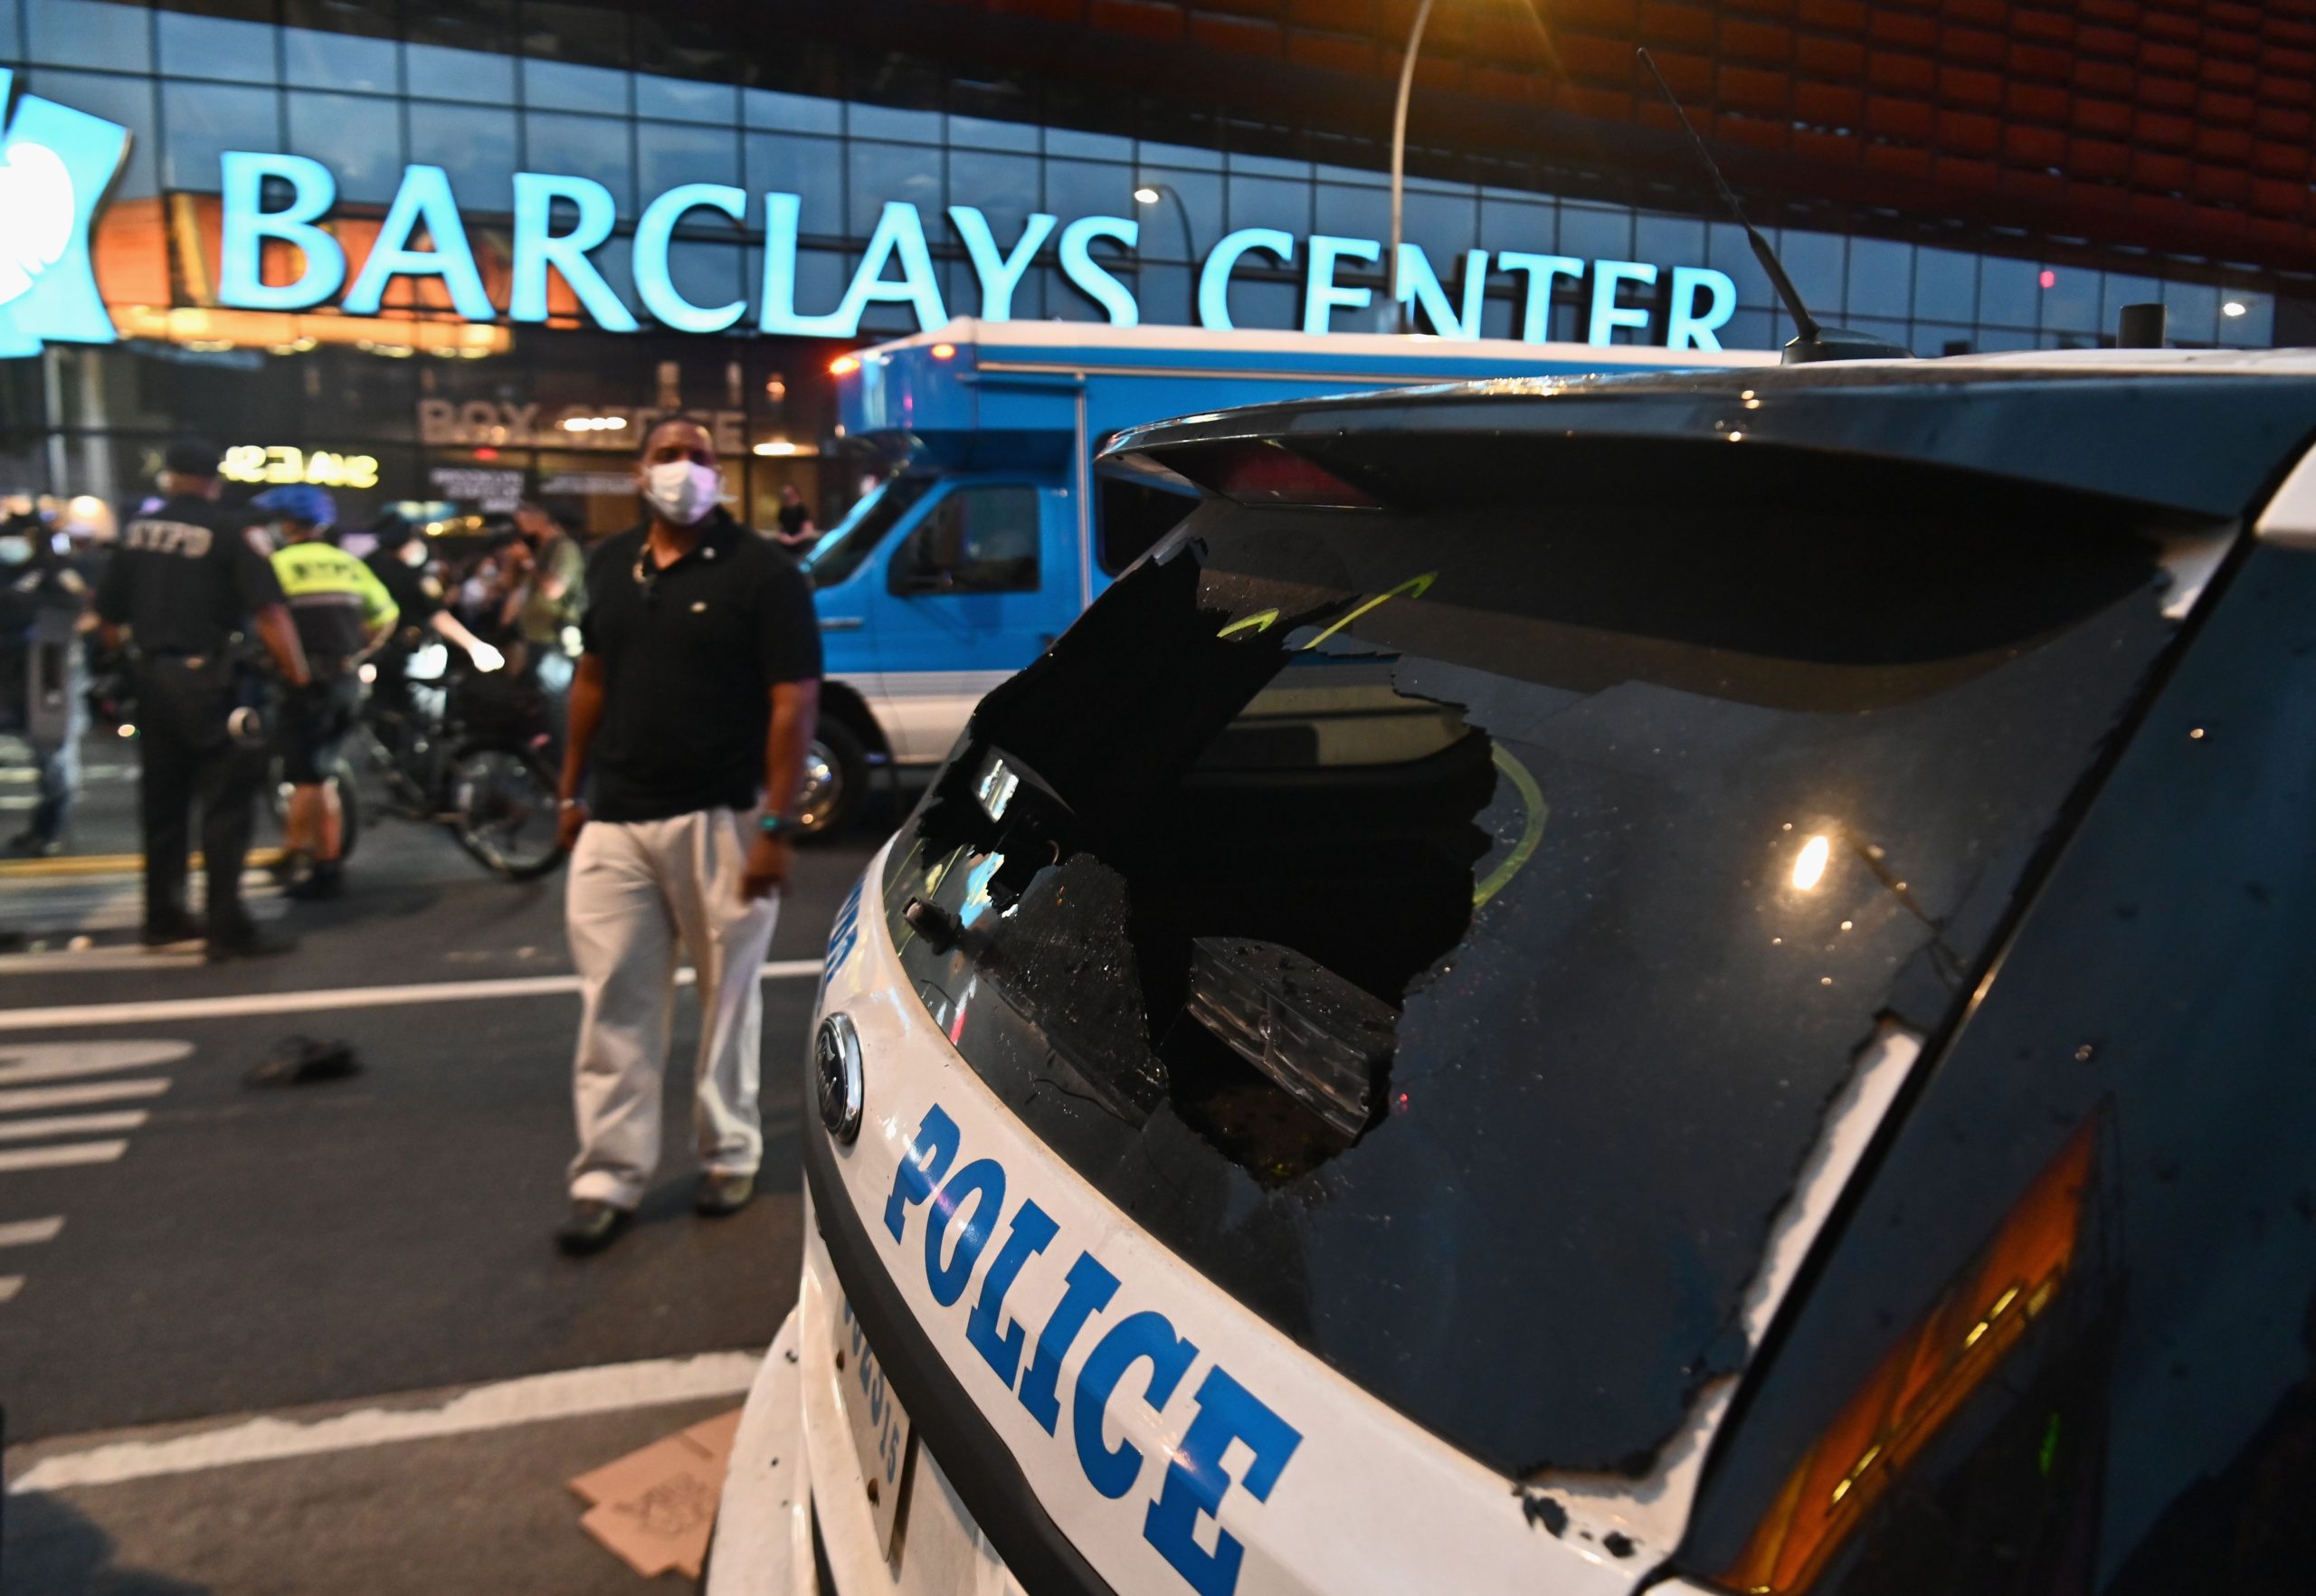 A smashed NYPD car rear windshield is seen during a "Black Lives Matter" protest near Barclays Center on May 29, 2020 in the Brooklyn borough of New York City.